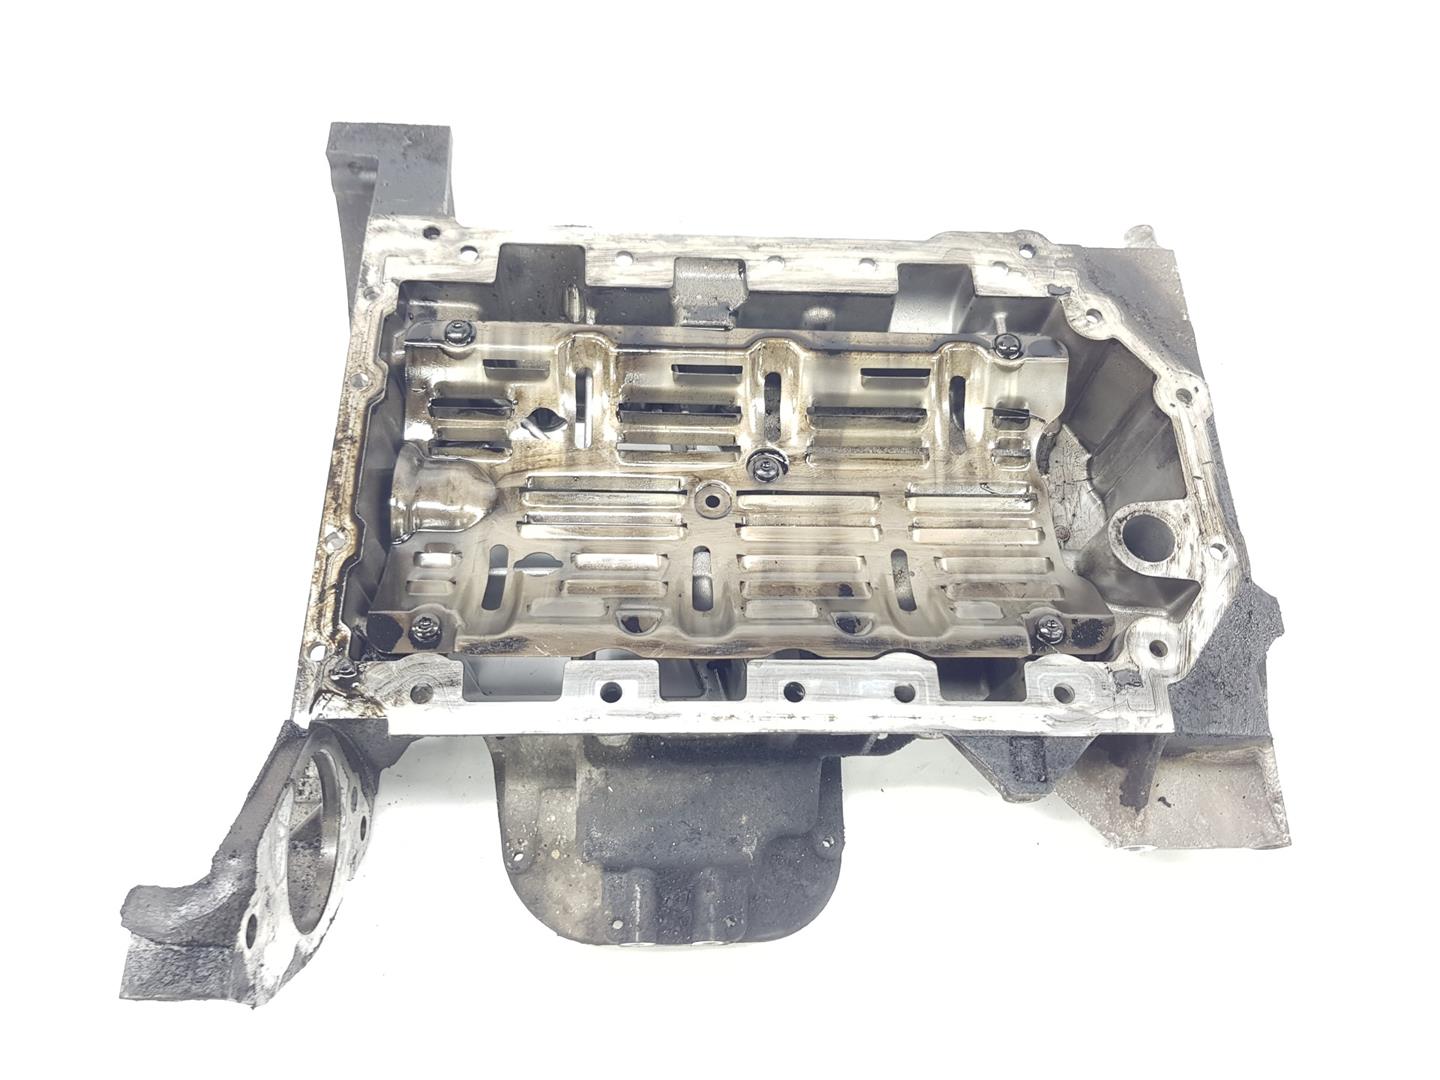 LAND ROVER Discovery 3 generation (2004-2009) Other Engine Compartment Parts LR011693, LR011693, 1111AA 24238319